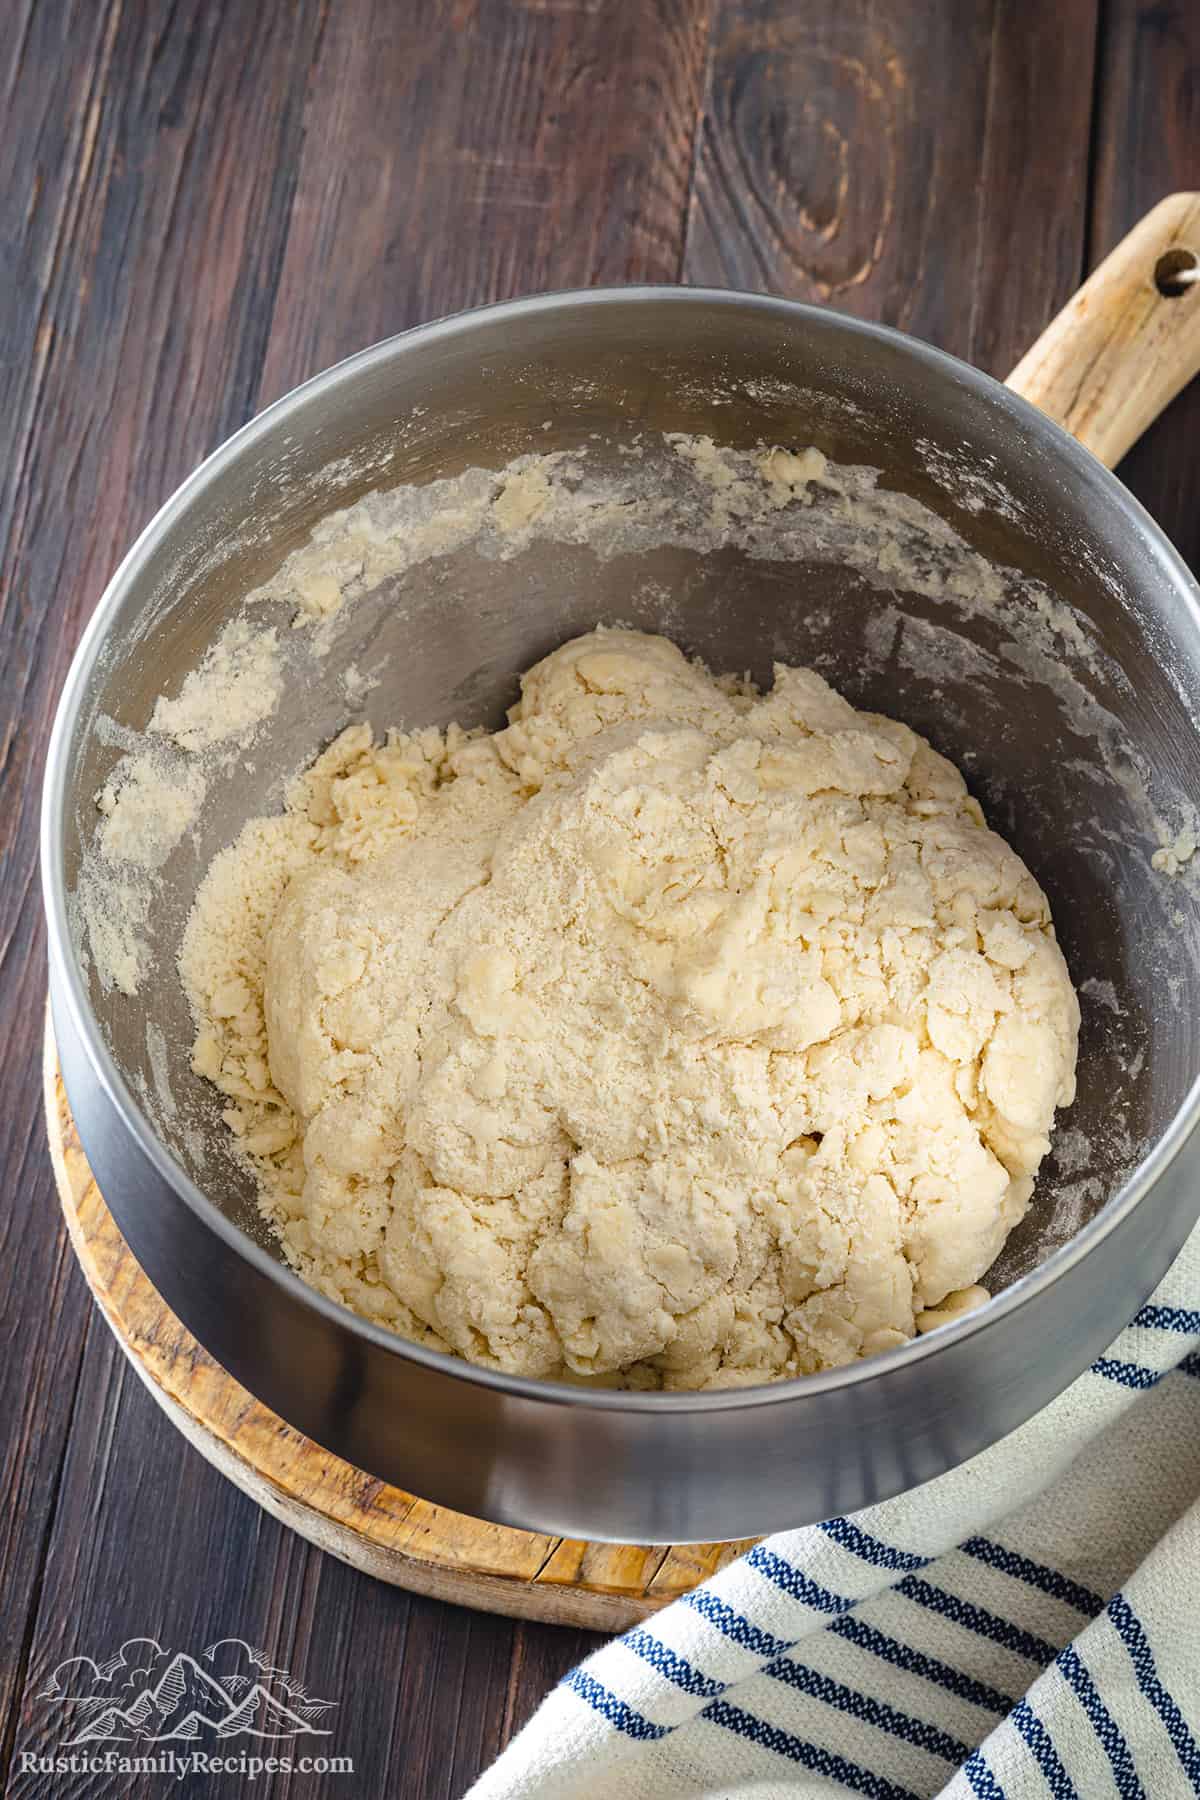 Biscuit dough in a mixing bowl.